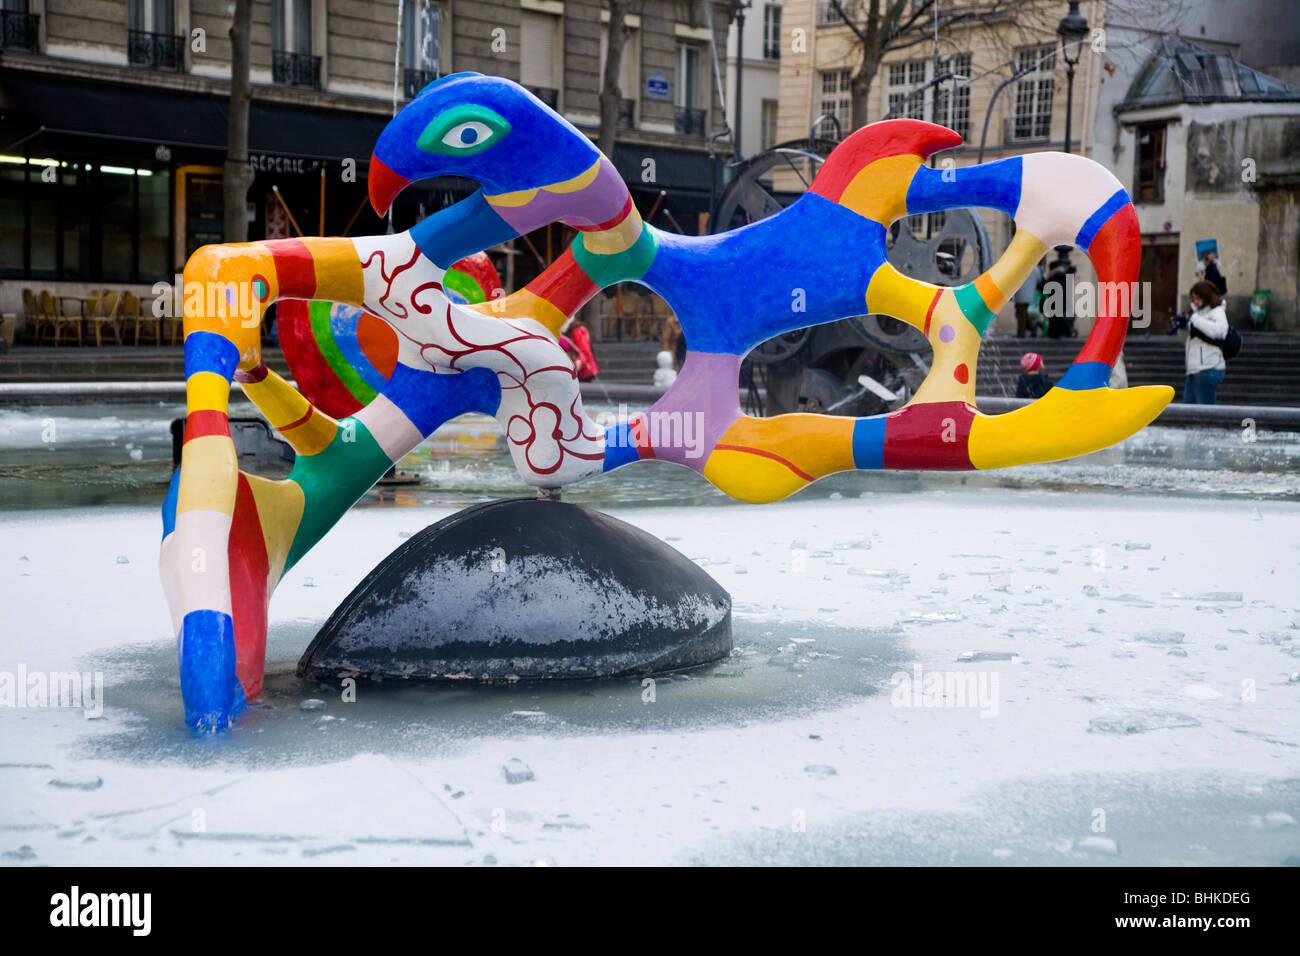 Exhibit of modern art / sculpture outside – in the pond / pools – at he Pompidou museum / centre in cold winter weather. Paris. Stock Photo